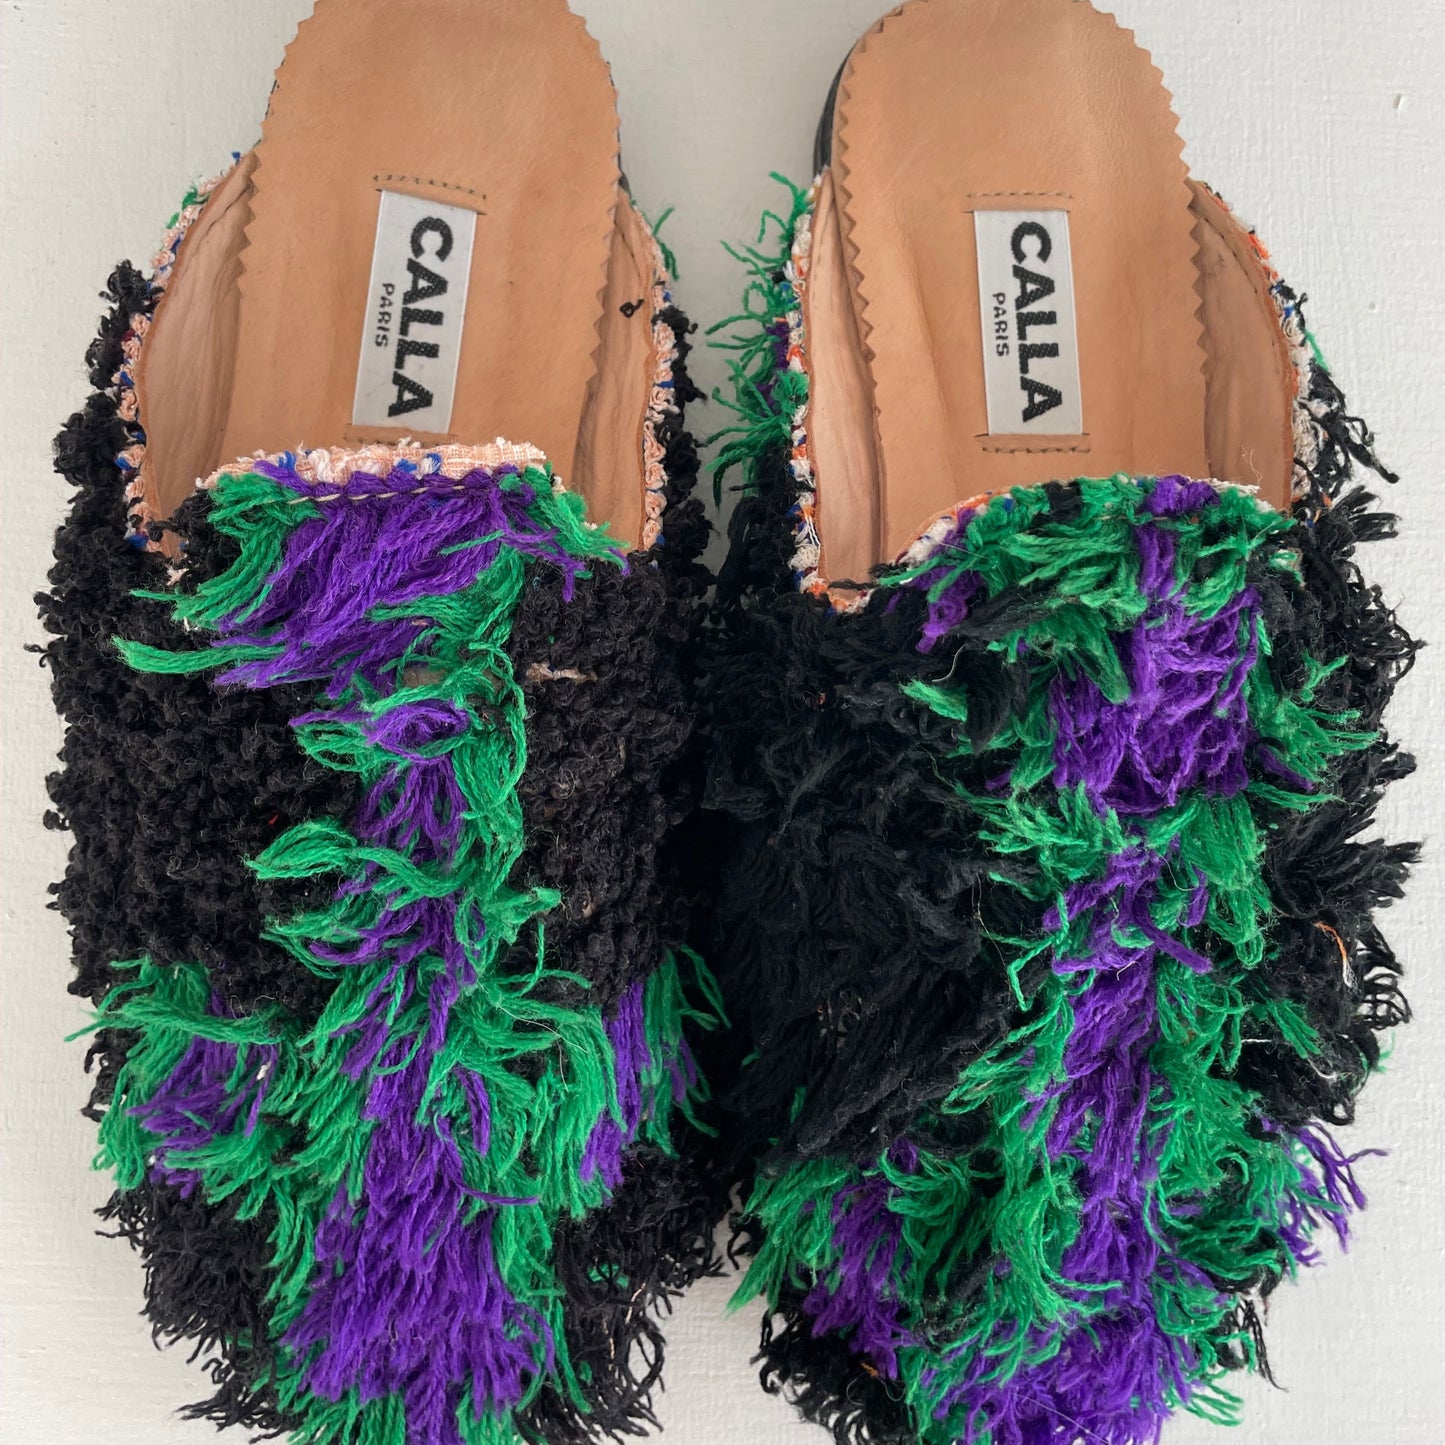 Sandal, Niki babouches slippers, size 38 from Morocco